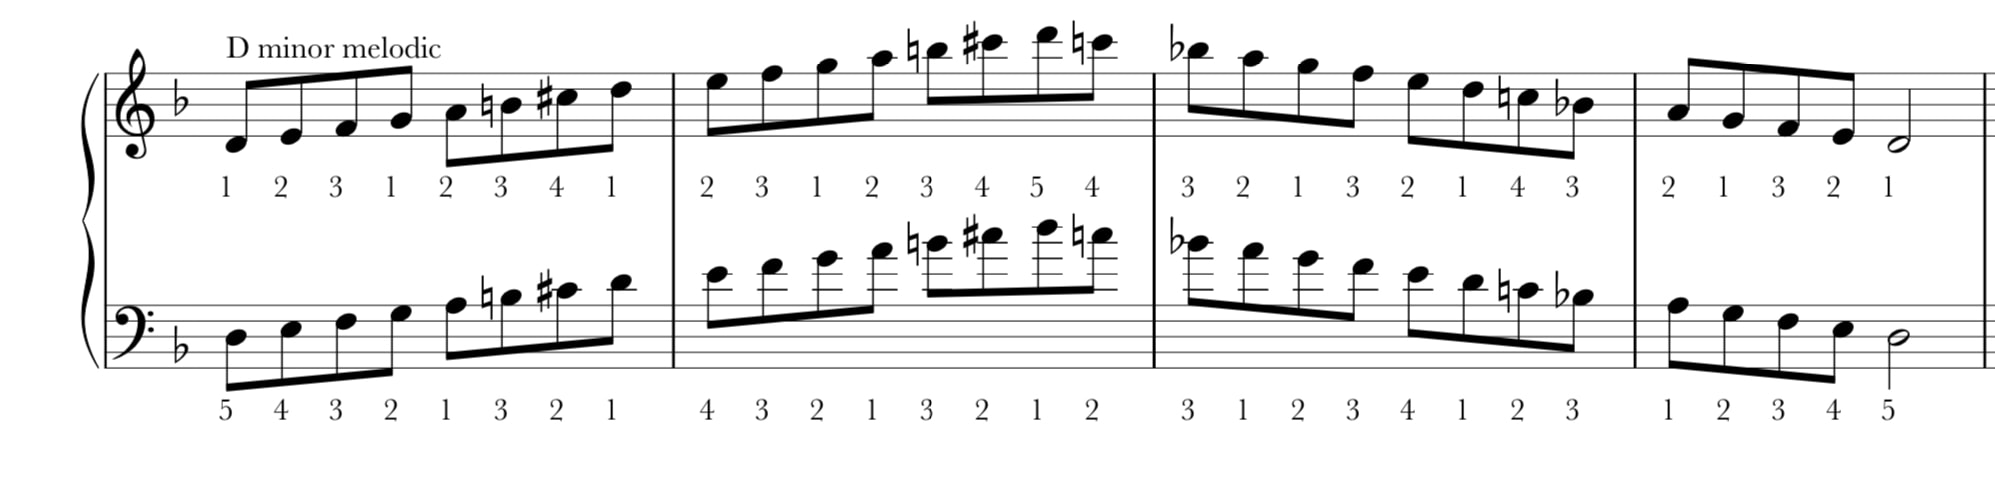 D minor melodic scale